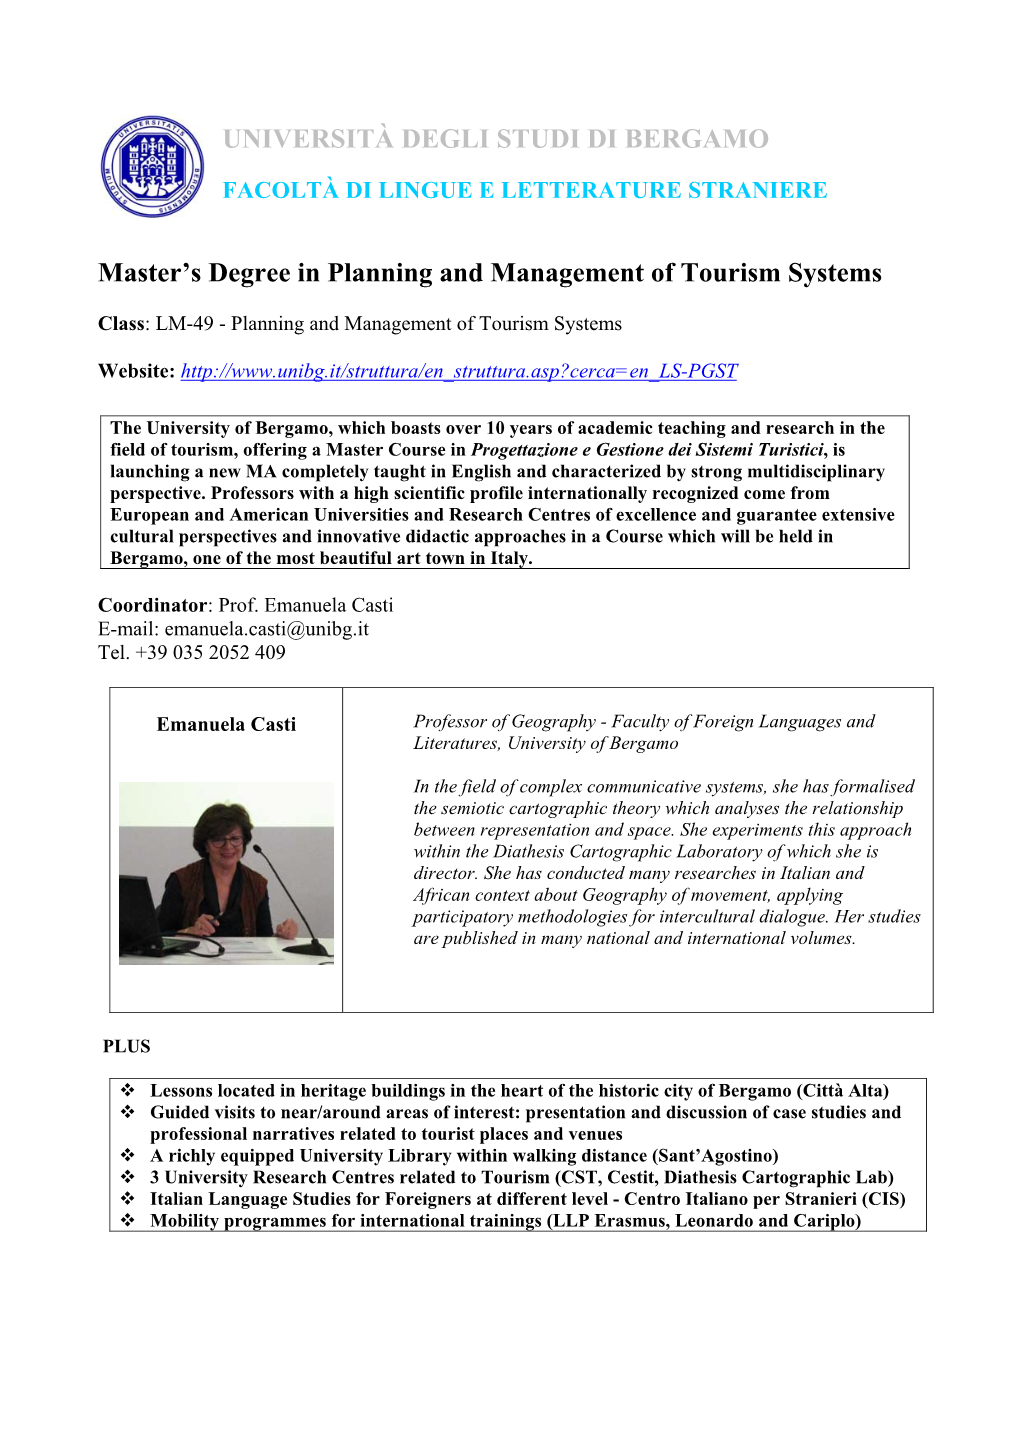 Master's Degree in Planning and Management of Tourism Systems